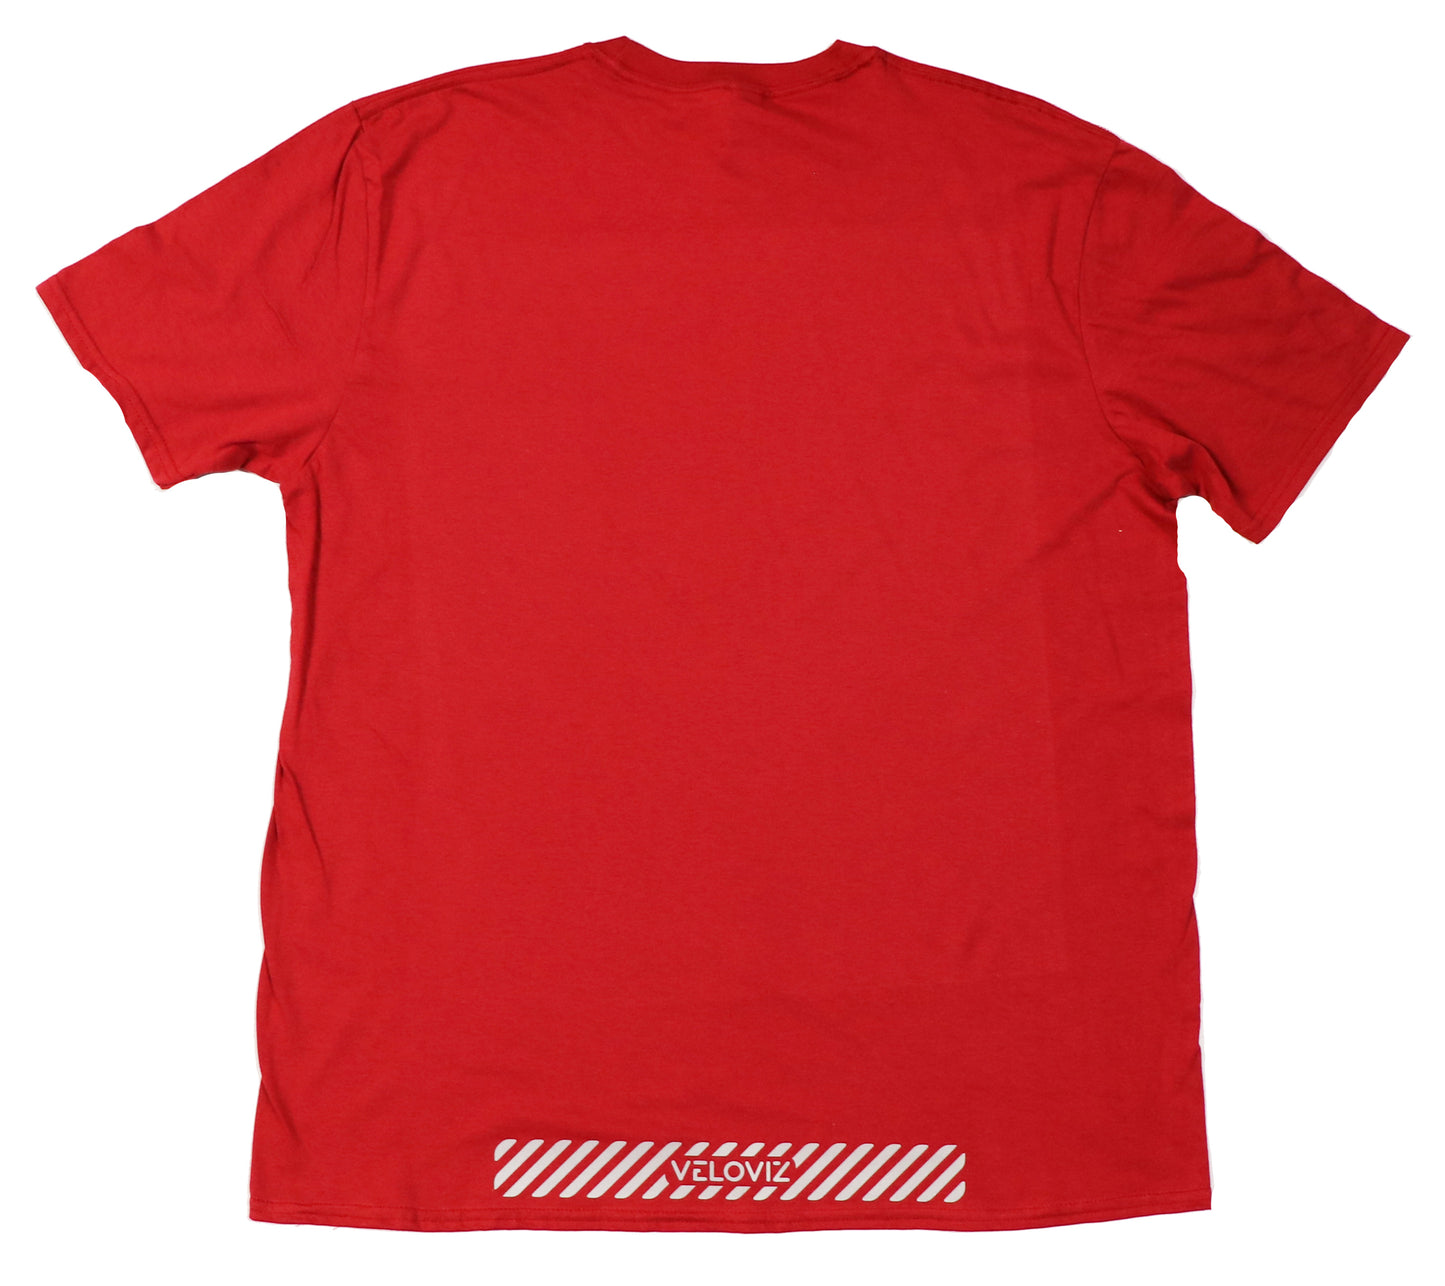 Reflective T Shirts - Infinite Visibility - Red (Mens)